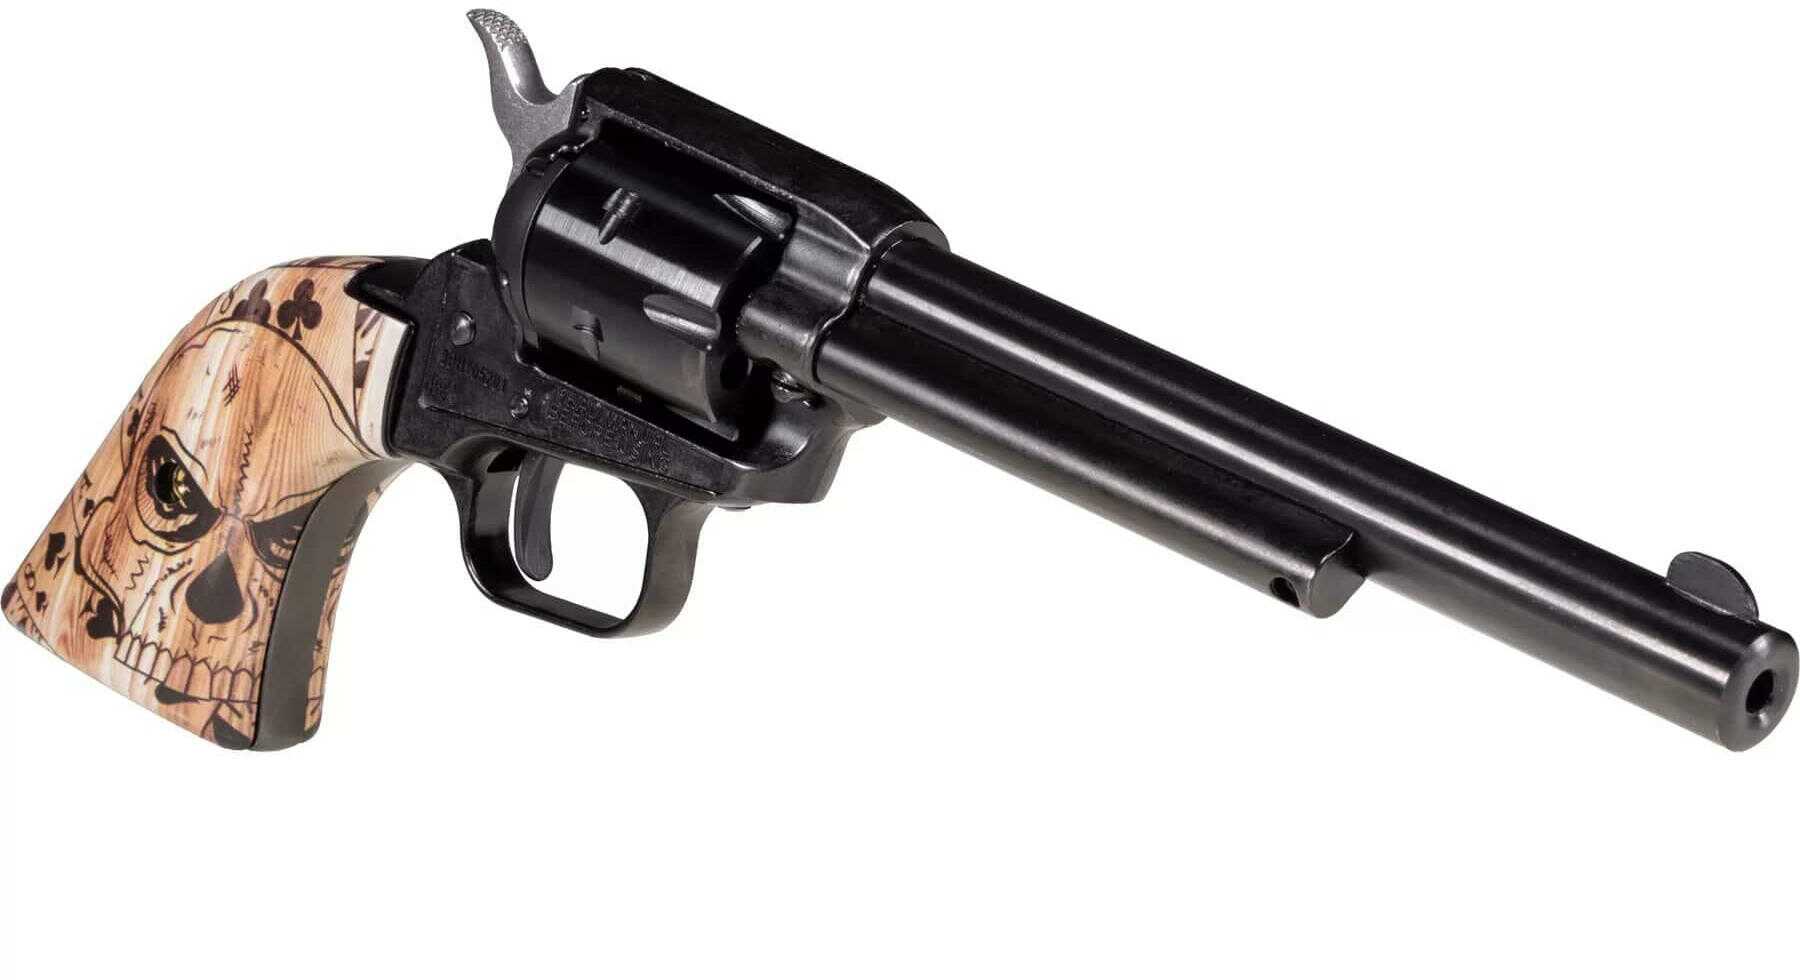 Heritage Mfg. Rough Rider Rimfire Revolver 22LR 6.5" Barrel 6Rd Capacity Fixed Front, Notched Rear Sights Ivory With Etched Deadman's Hand Grips Black Steel Finish